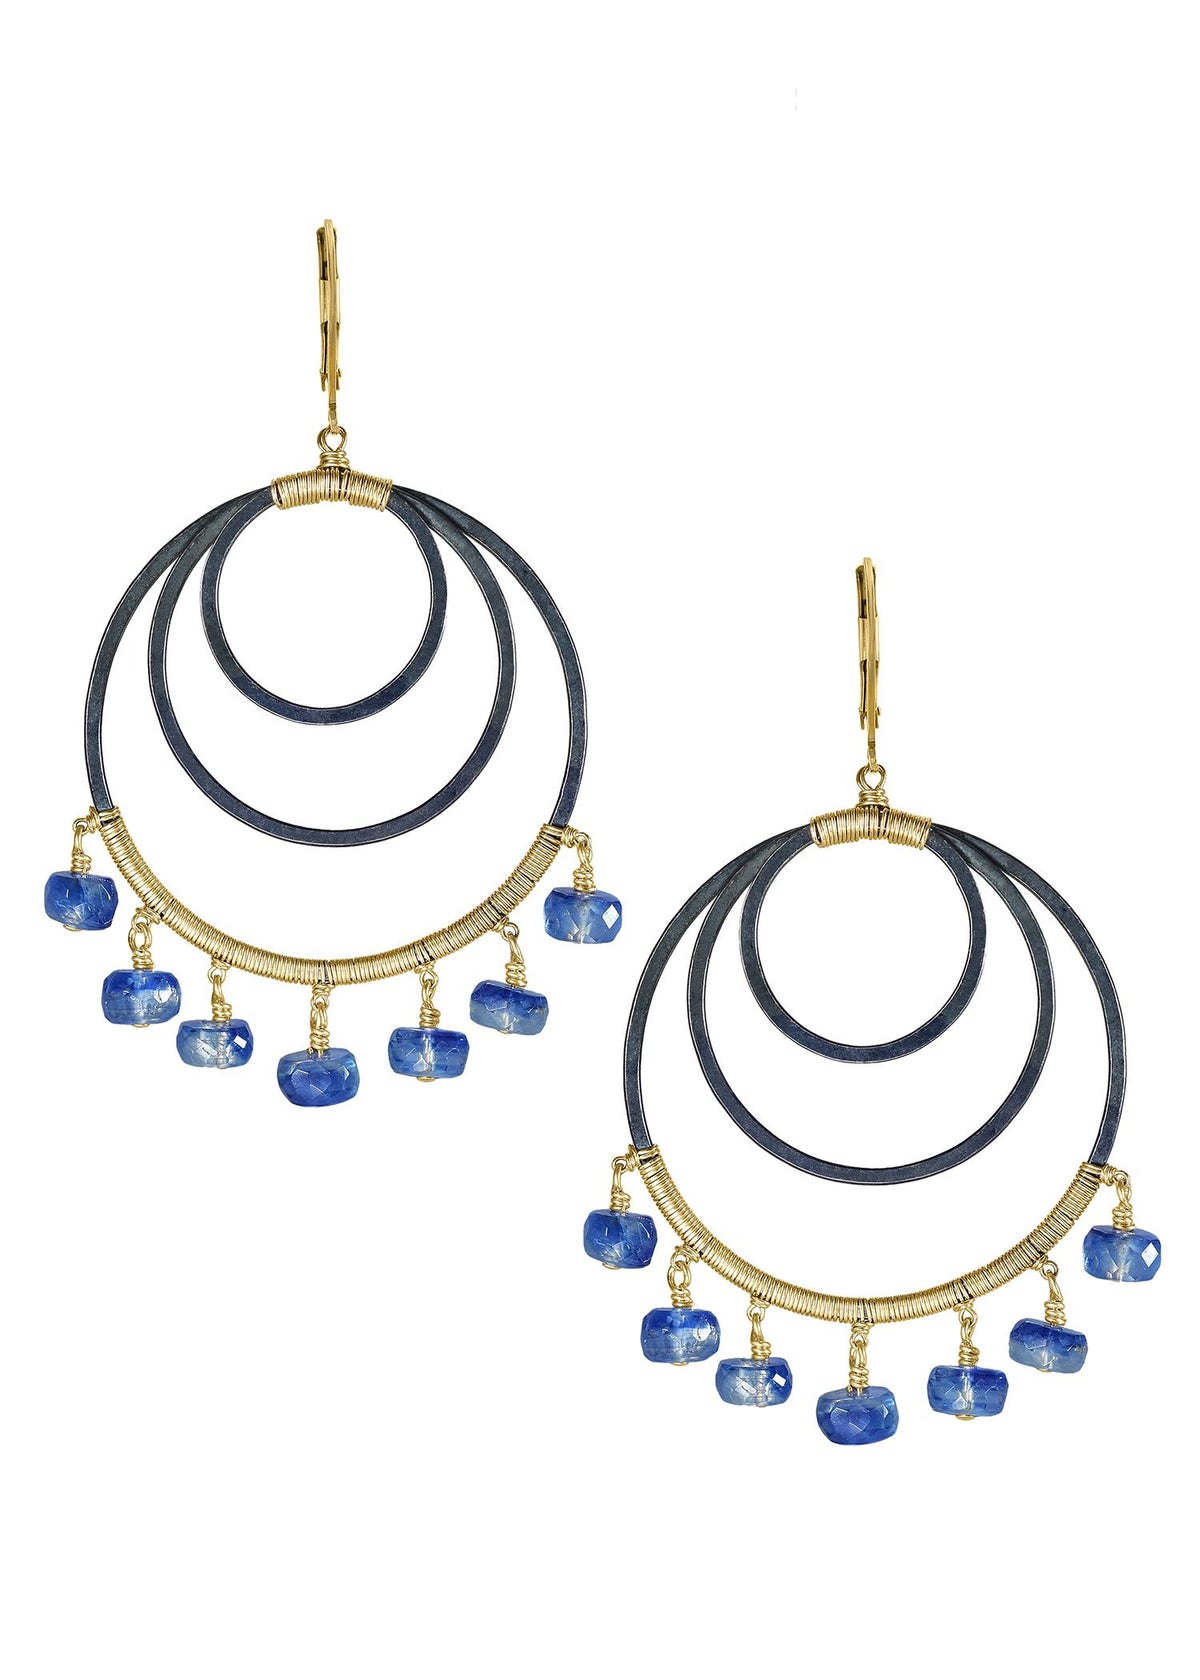 Kyanite 14k gold fill Blackened sterling silver Earrings measure 2-7/16&quot; in length (including the levers) and 1-5/16&quot; in width Handmade in our Los Angeles studio